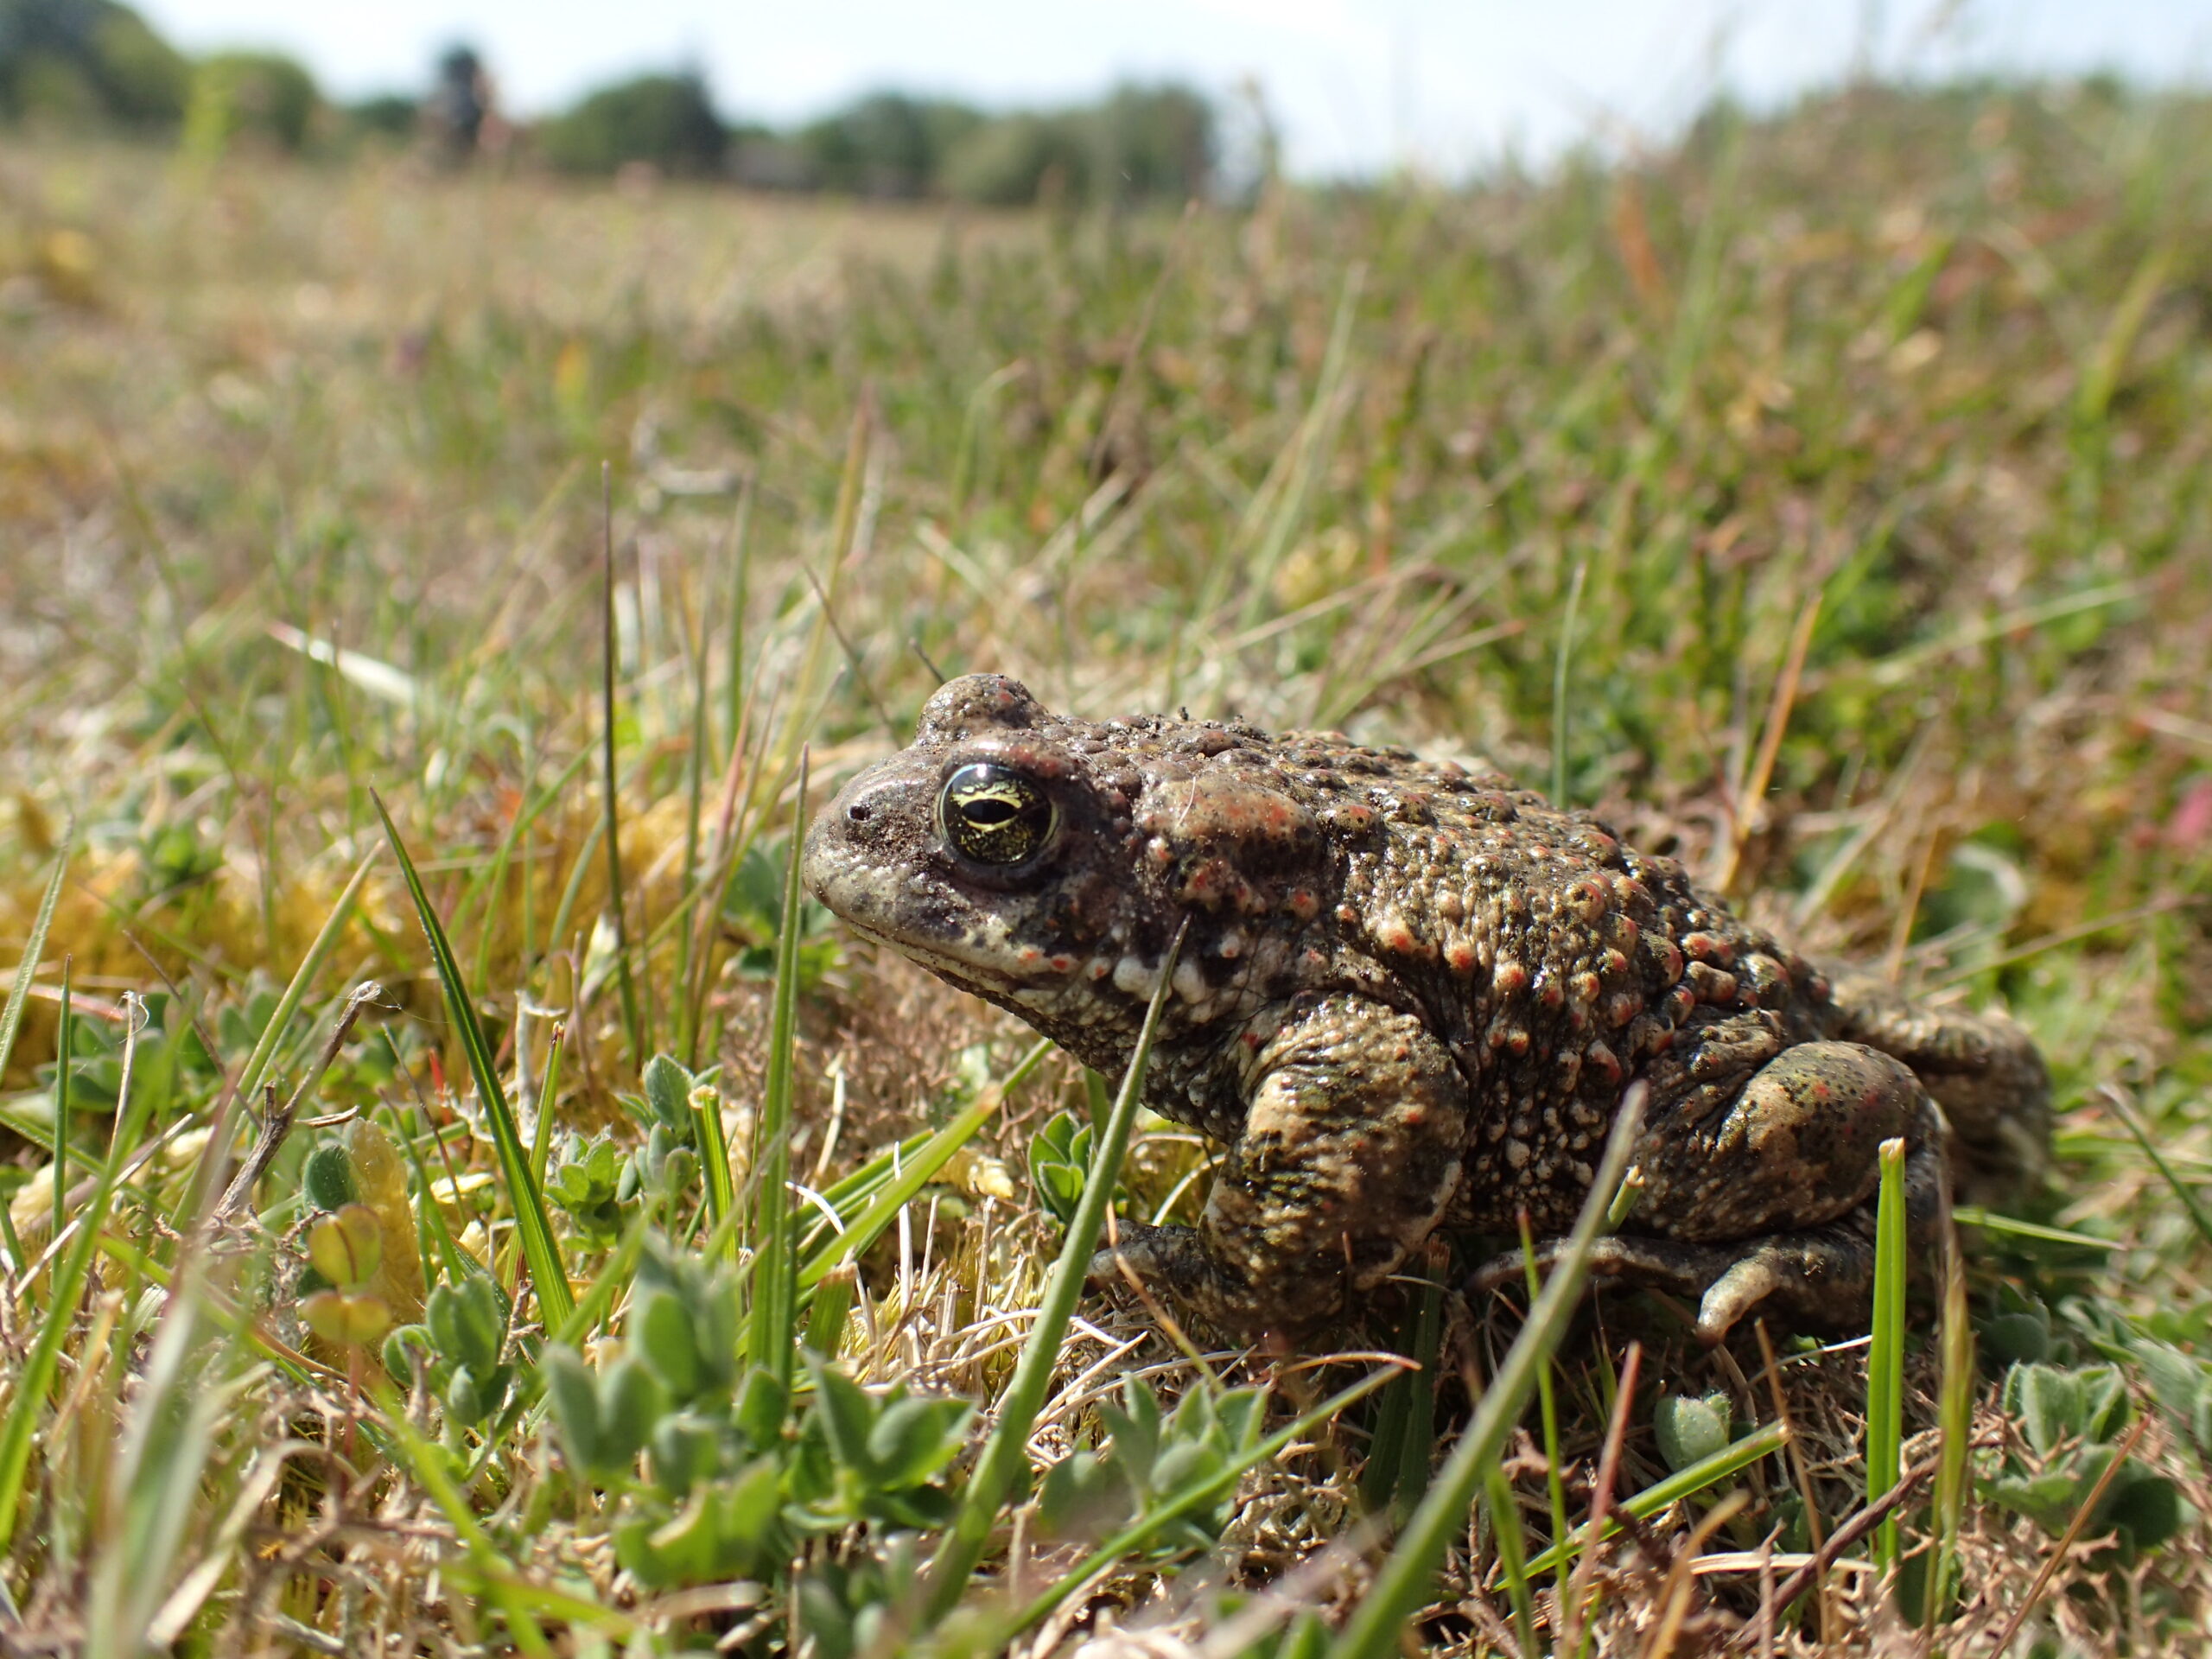 A Natterjack Toad photographed sat in a field on the grass.